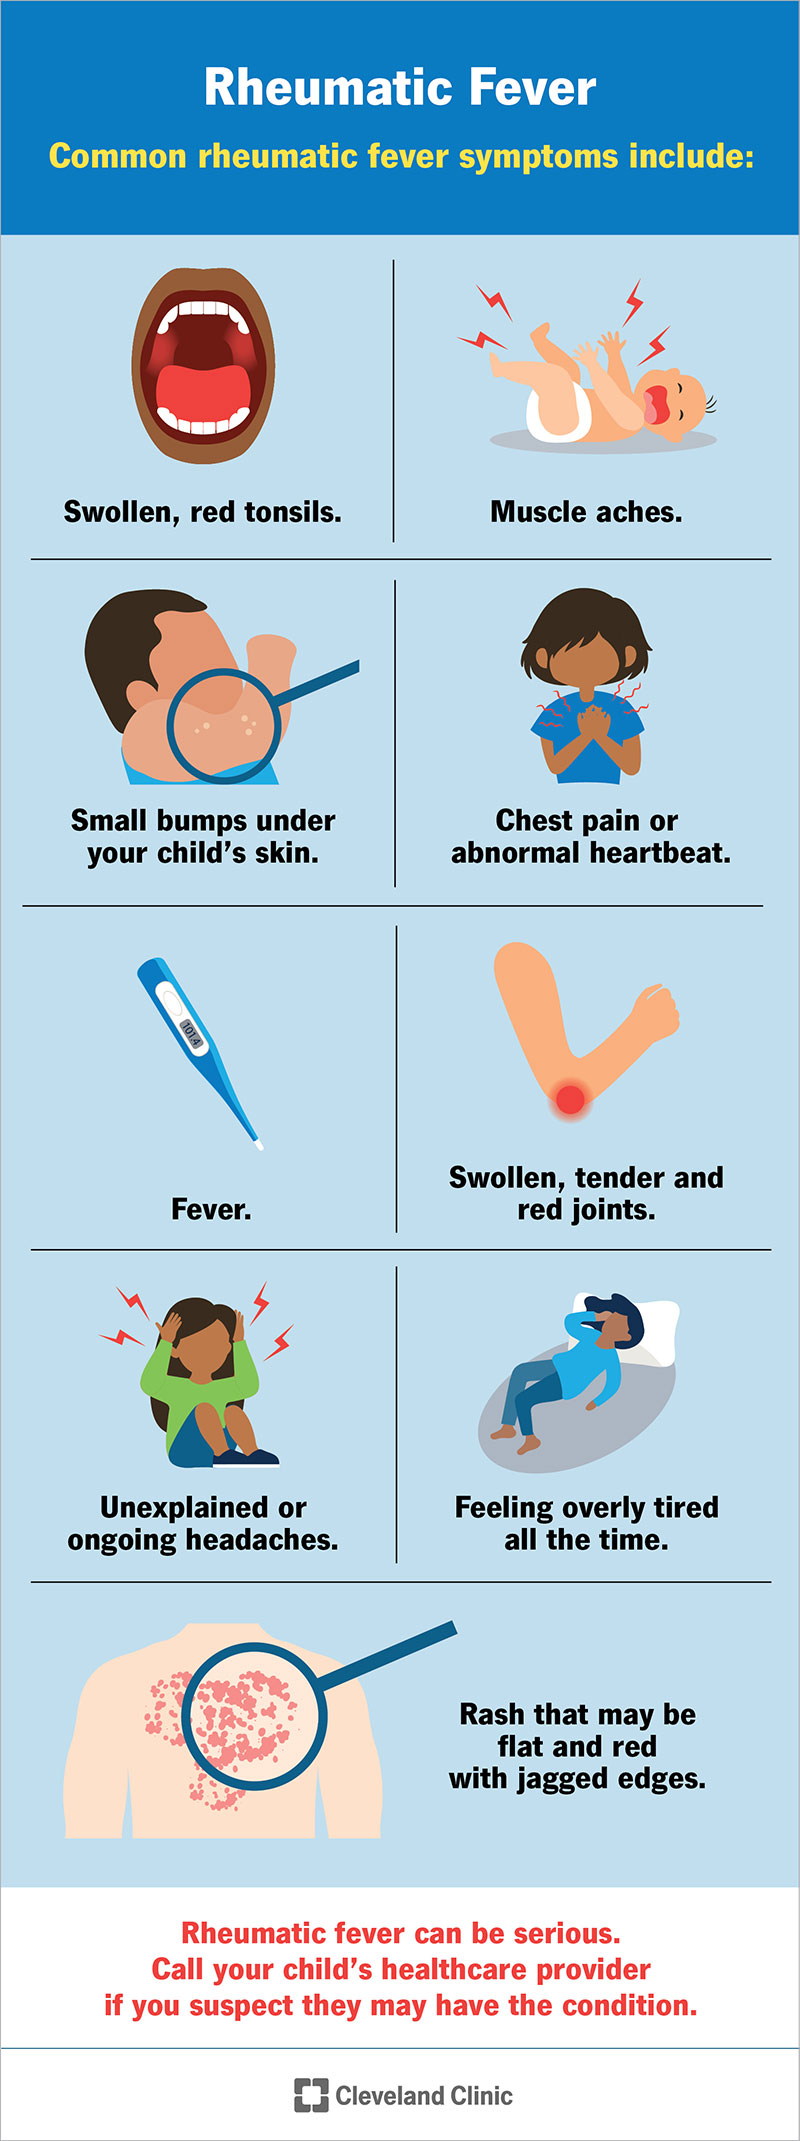 Symptoms of rheumatic fever can vary widely, depending on what part of your child’s body the disease impacts. Common symptoms include rash, muscle aches and fever.